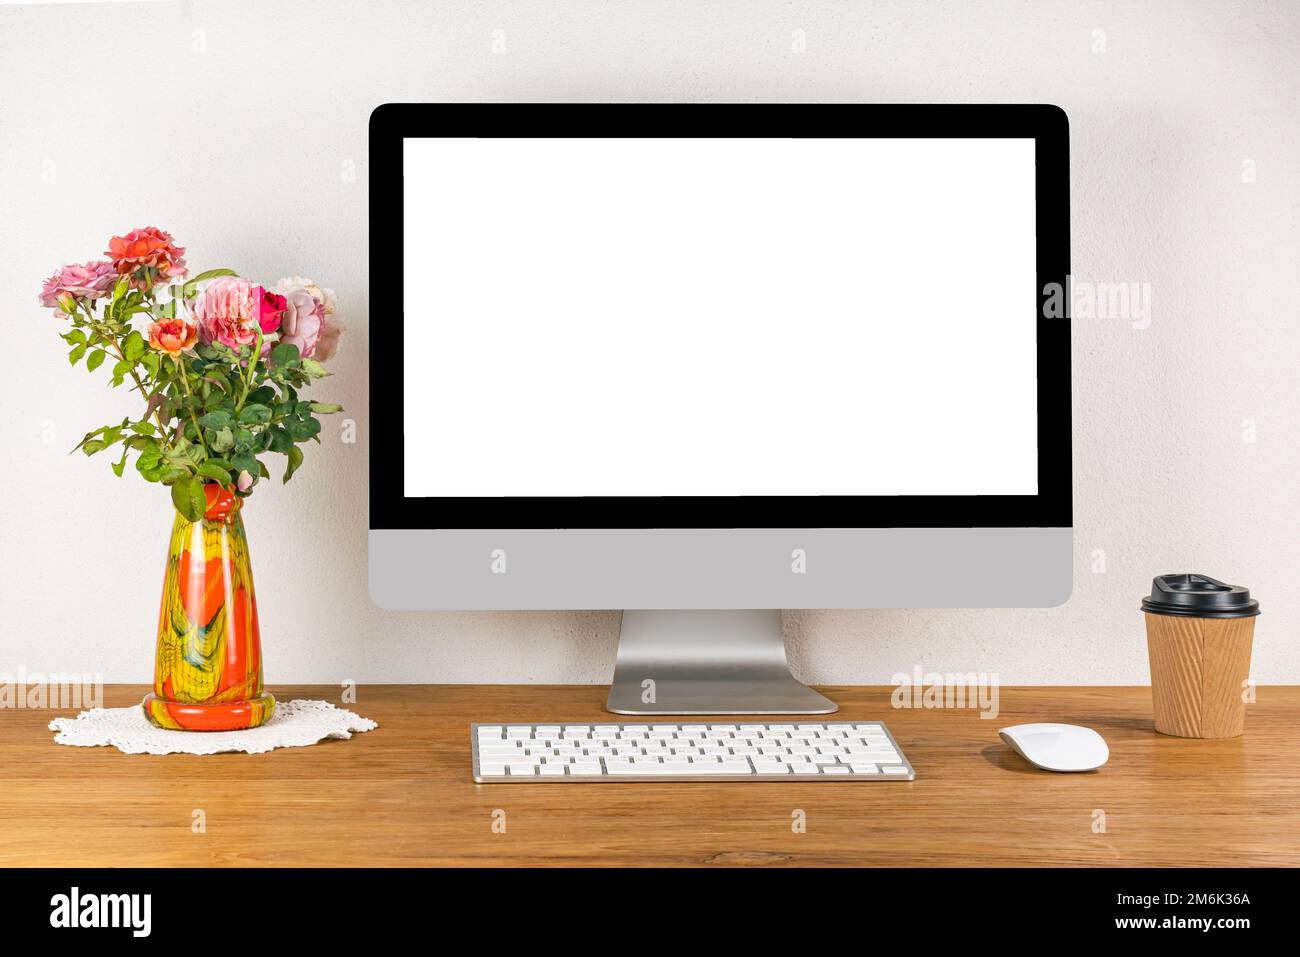 Blank screen desktop computer with wireless keyboard and mouse on wooden table. Stock Photo